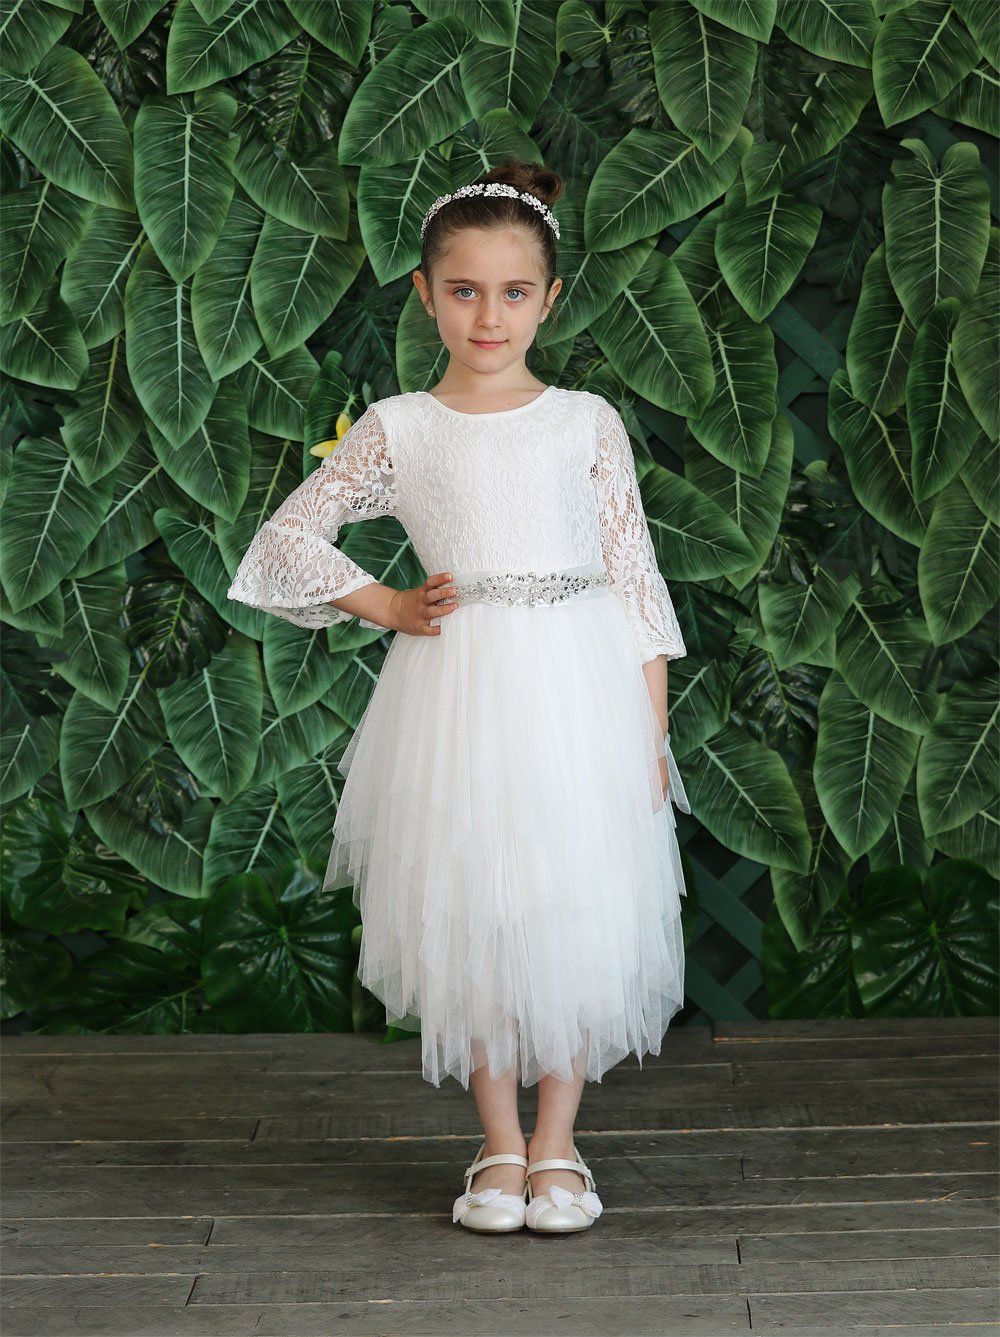 Flower Girl Tutu Dress 2023 3/4 Bell Sleeves A-Line Lace First Communion Gowns for Little Kid Beaded Bow Sash Baptism Junior Bridesmaid Wedding Guest Pink Navy-Blue Boho